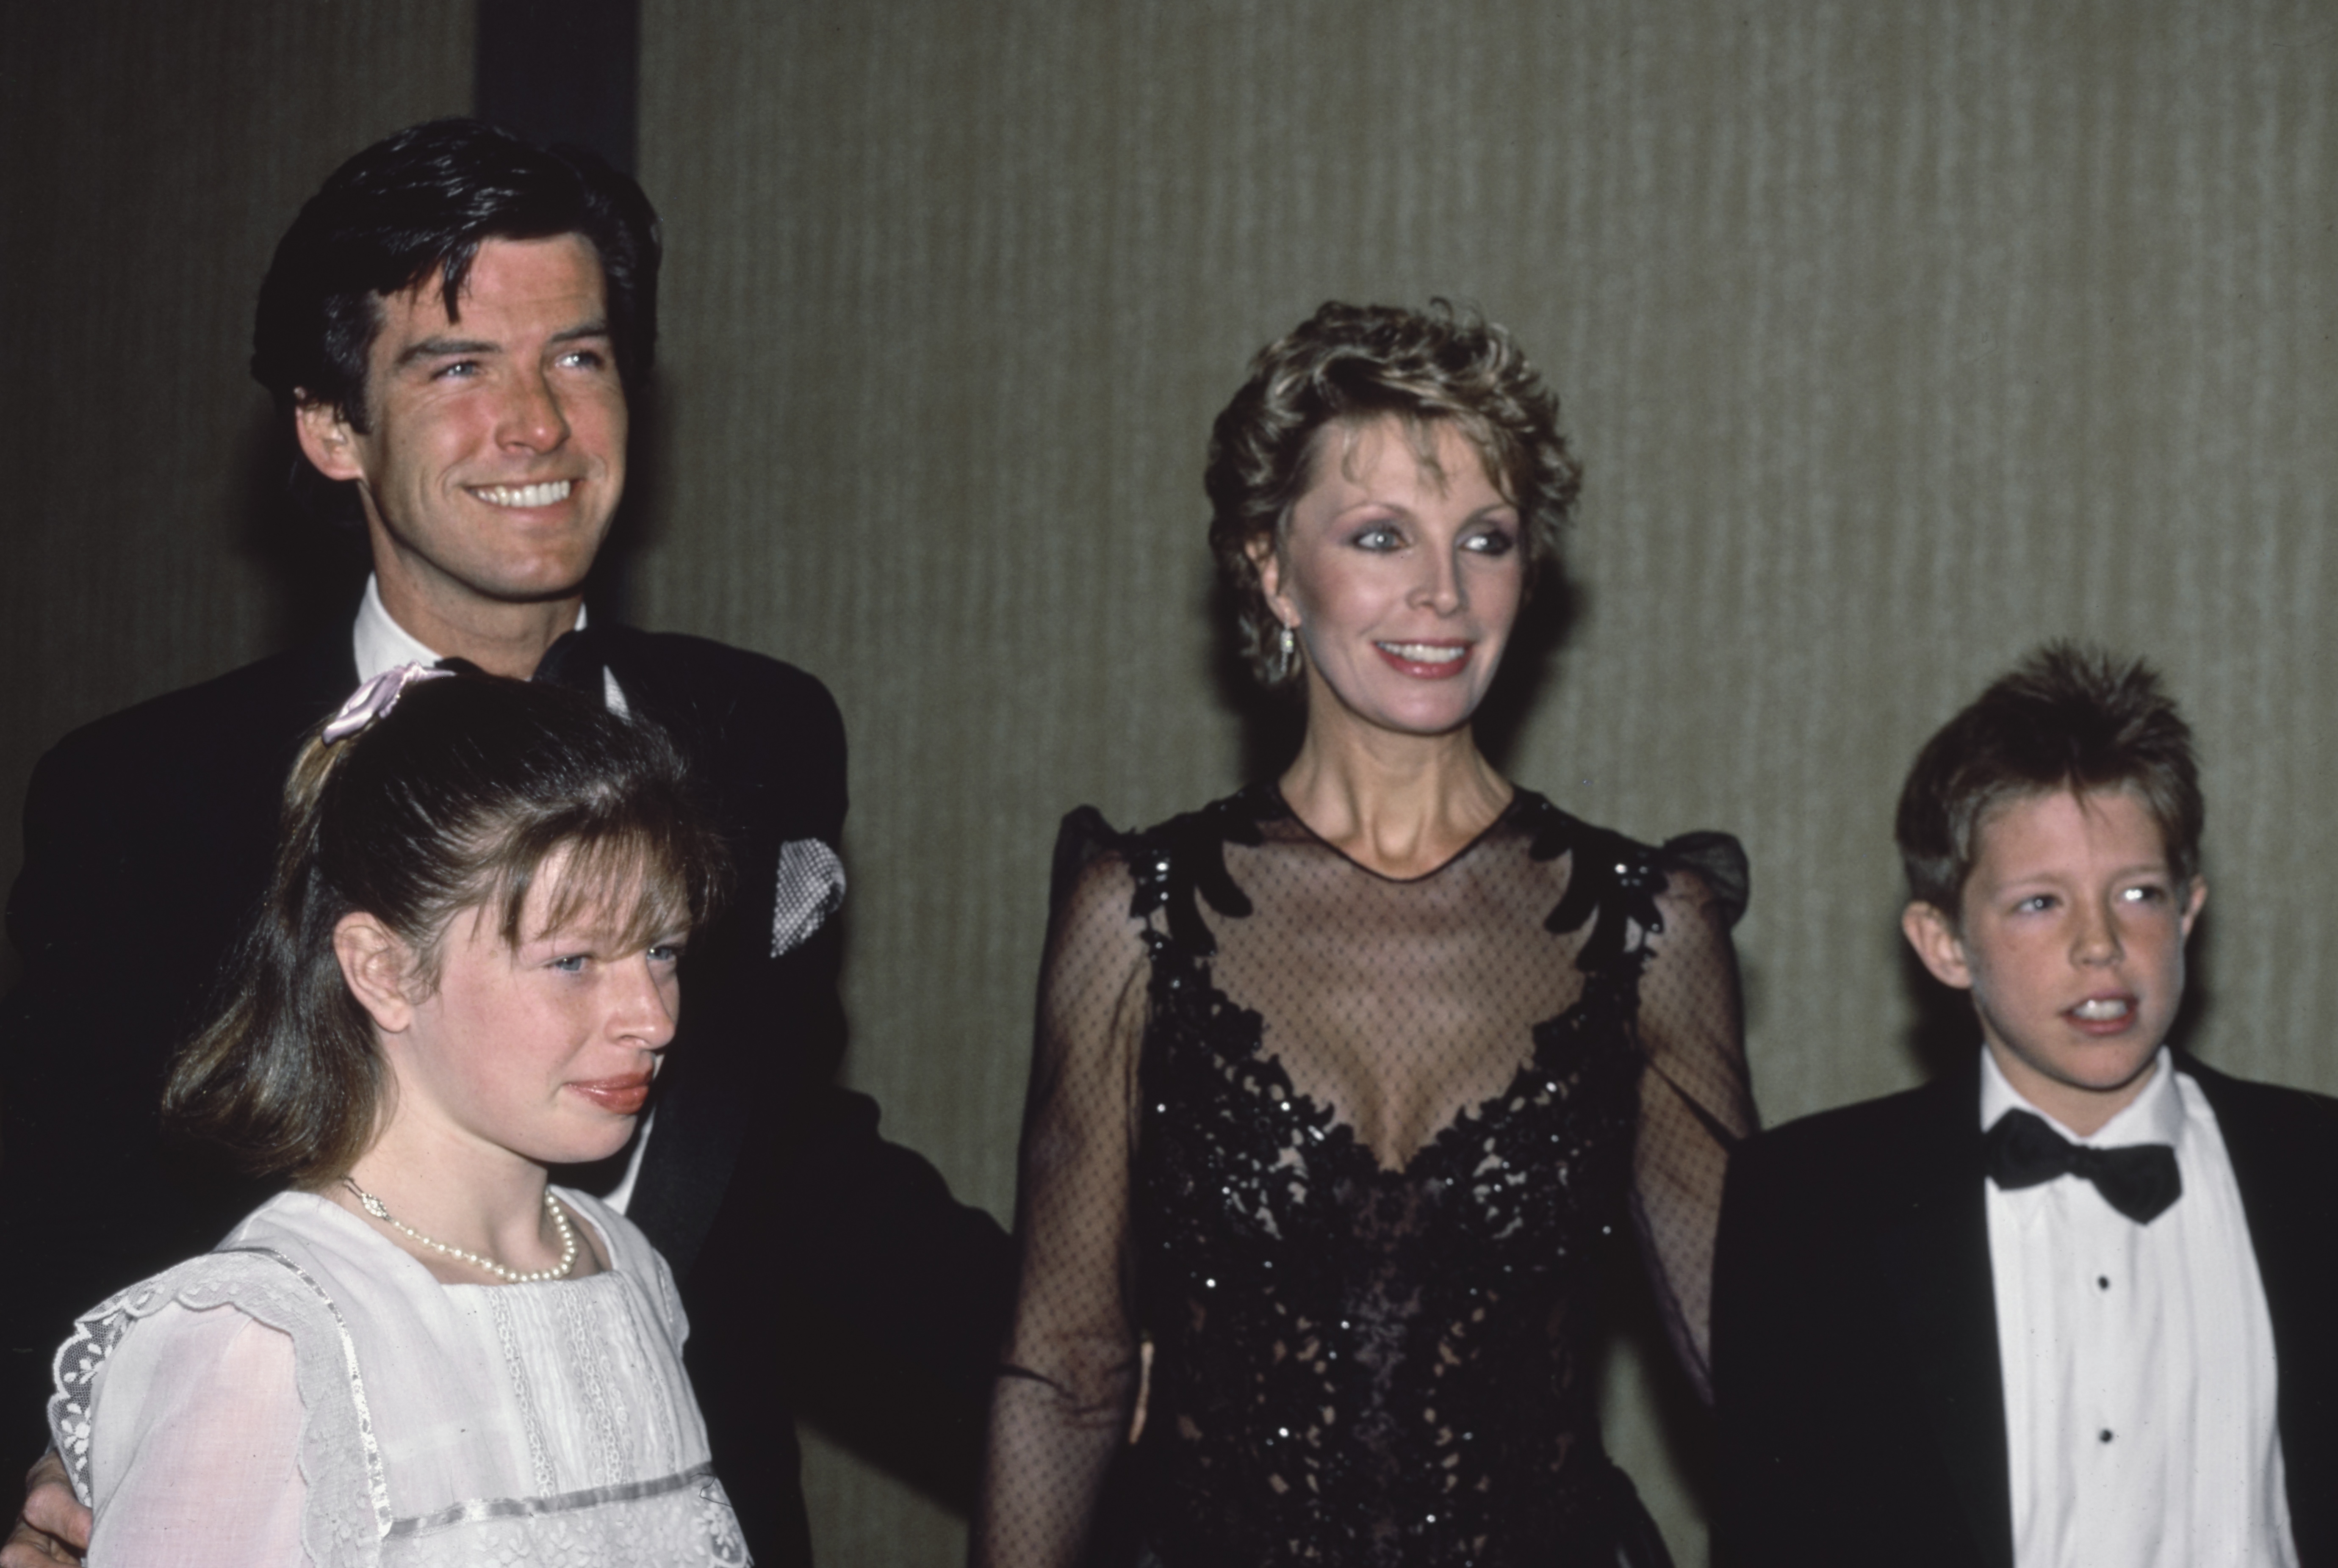 Charlotte, Pierce and Christopher Brosnan with Cassandra Harris at the Opening Night performance of "Cats" in Los Angeles, California on January 11, 1985 | Source: Getty Images